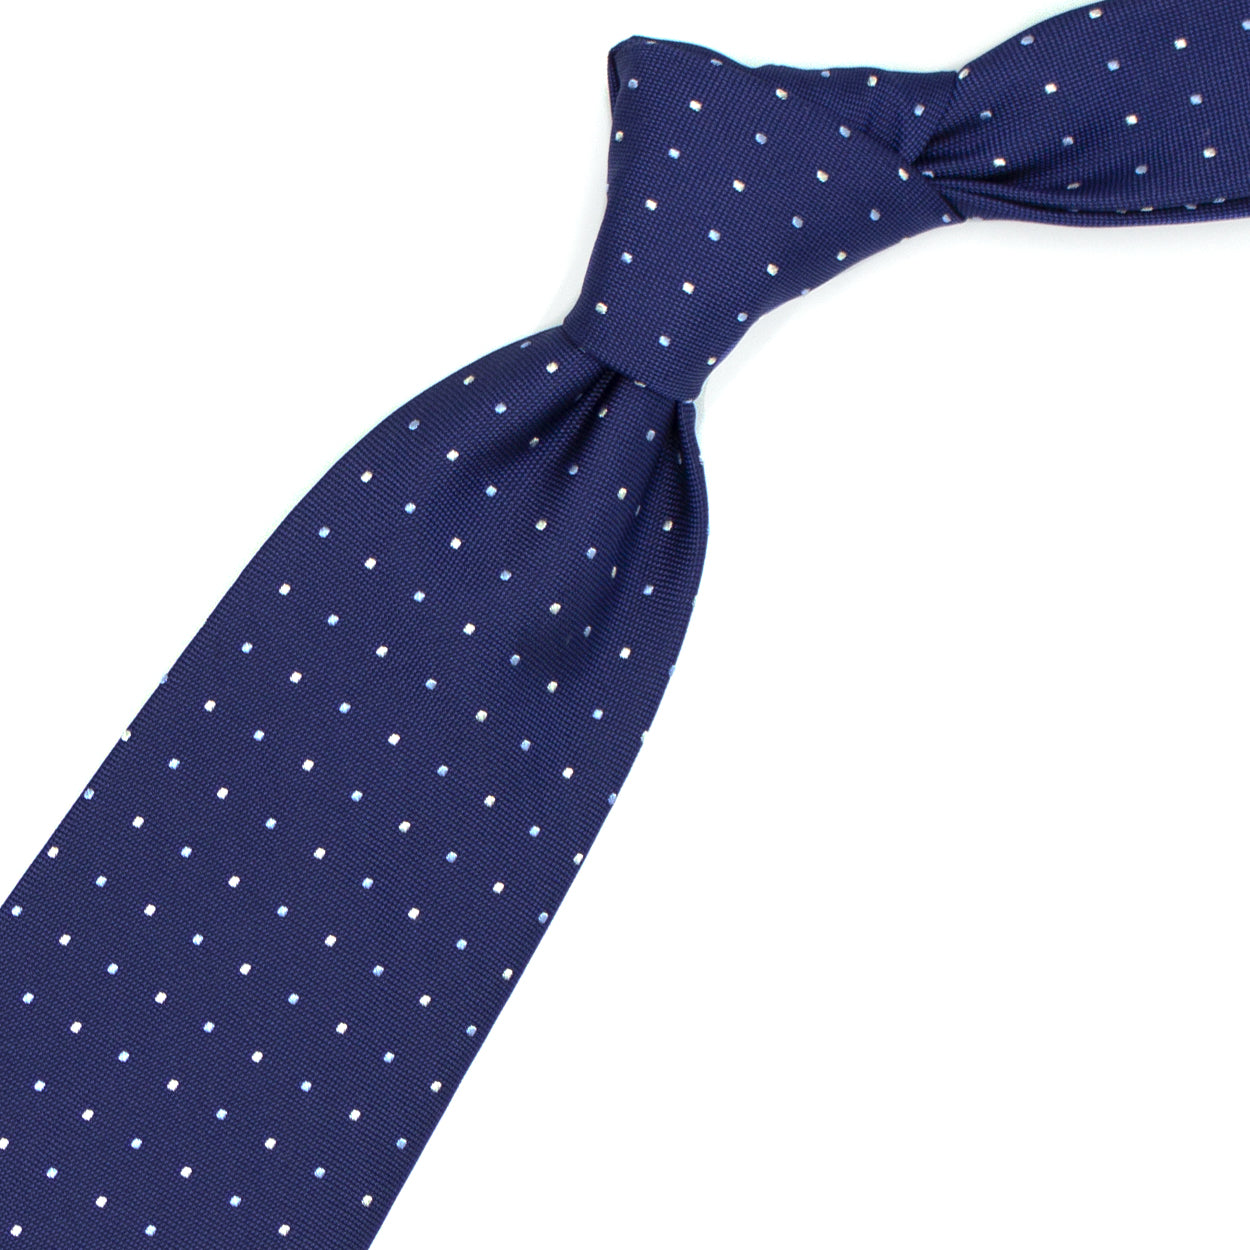 Blue tie with white and blue dots